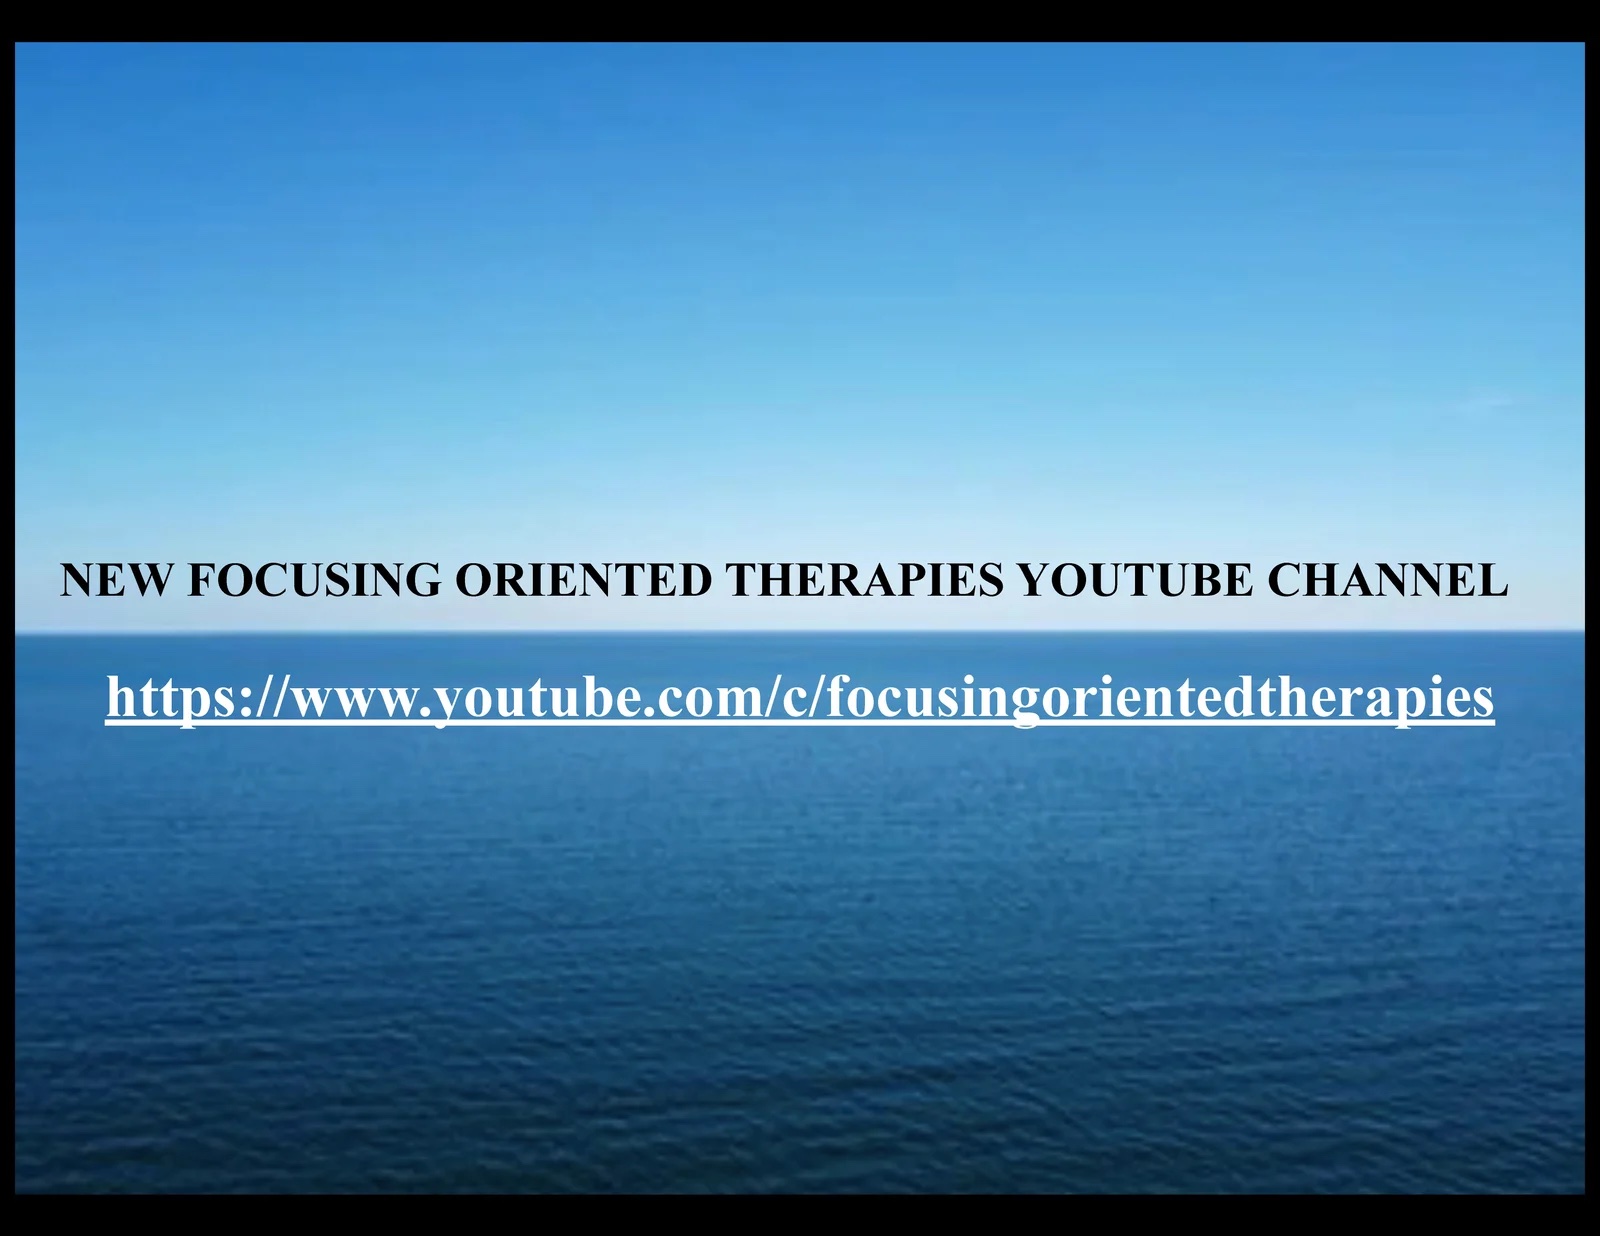 You are currently viewing LYNN PRESTON ANNOUNCES NEW FOCUSING ORIENTED THERAPIES YOUTUBE CHANNEL!